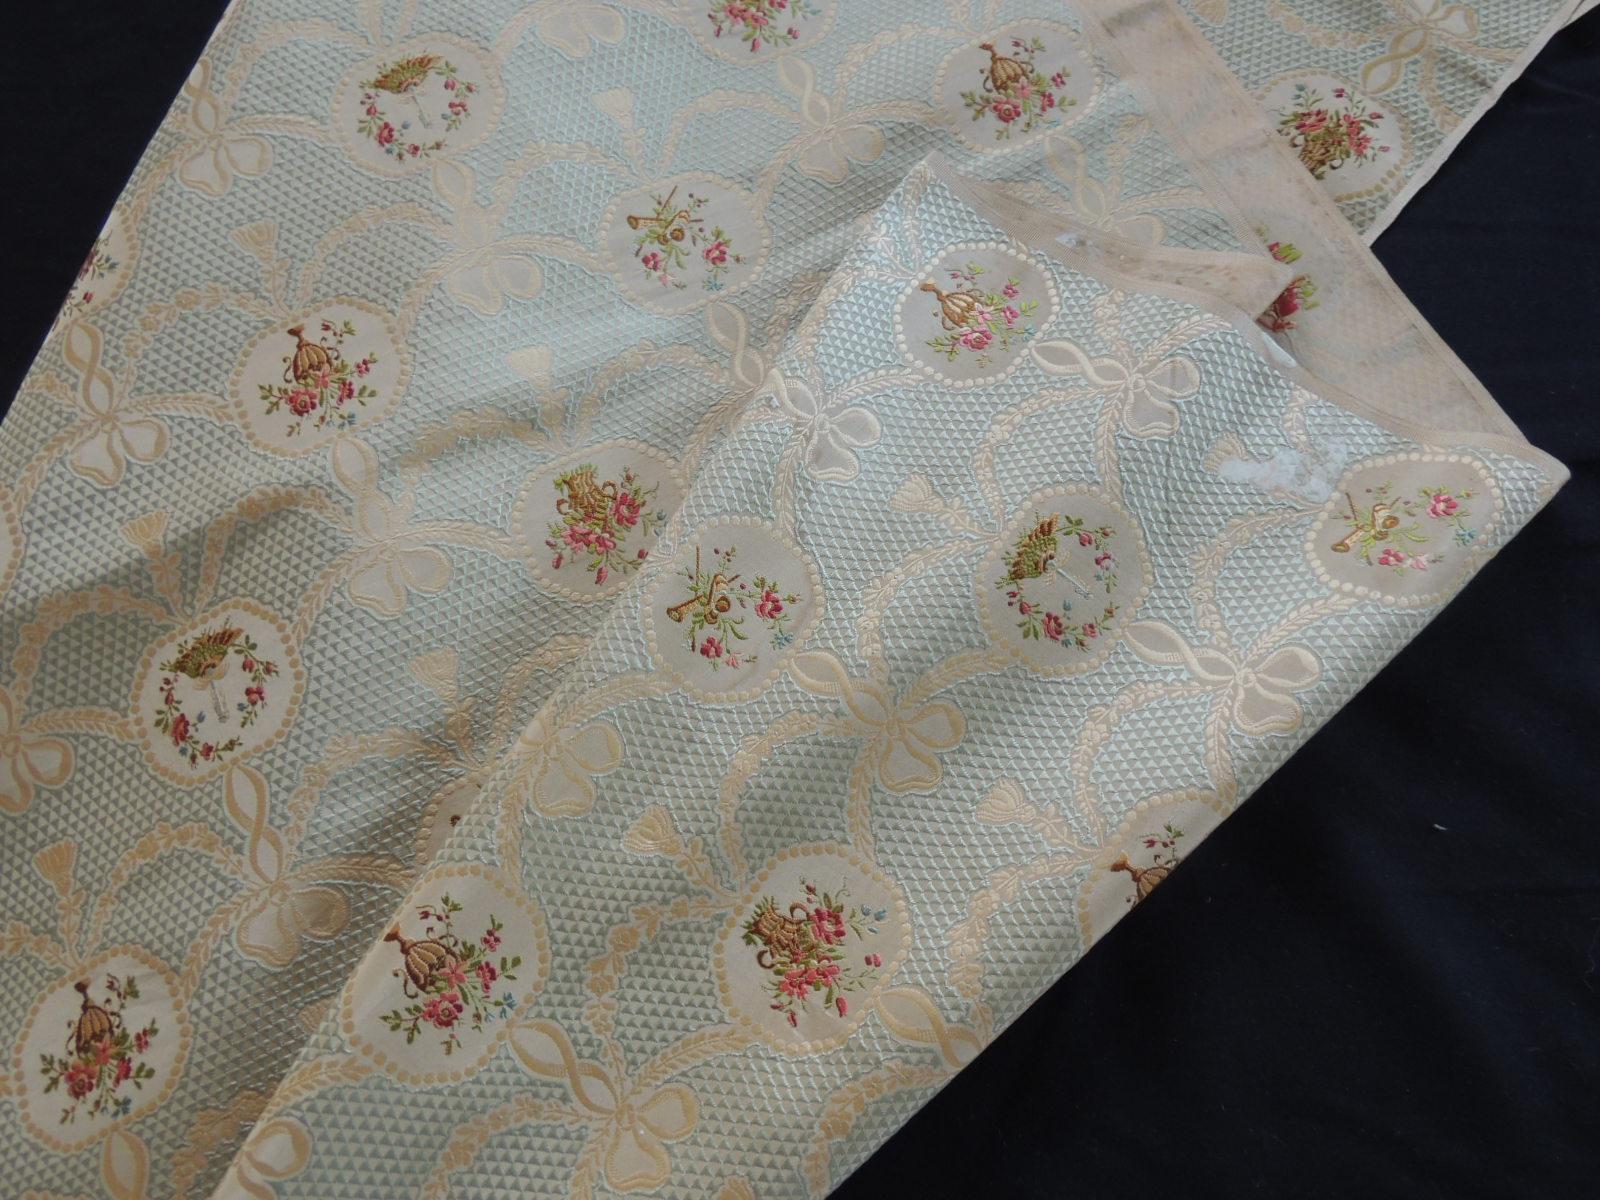 Hand-Crafted 19th Century Silk Brocade Floral Gold and Celadon Textile Panel